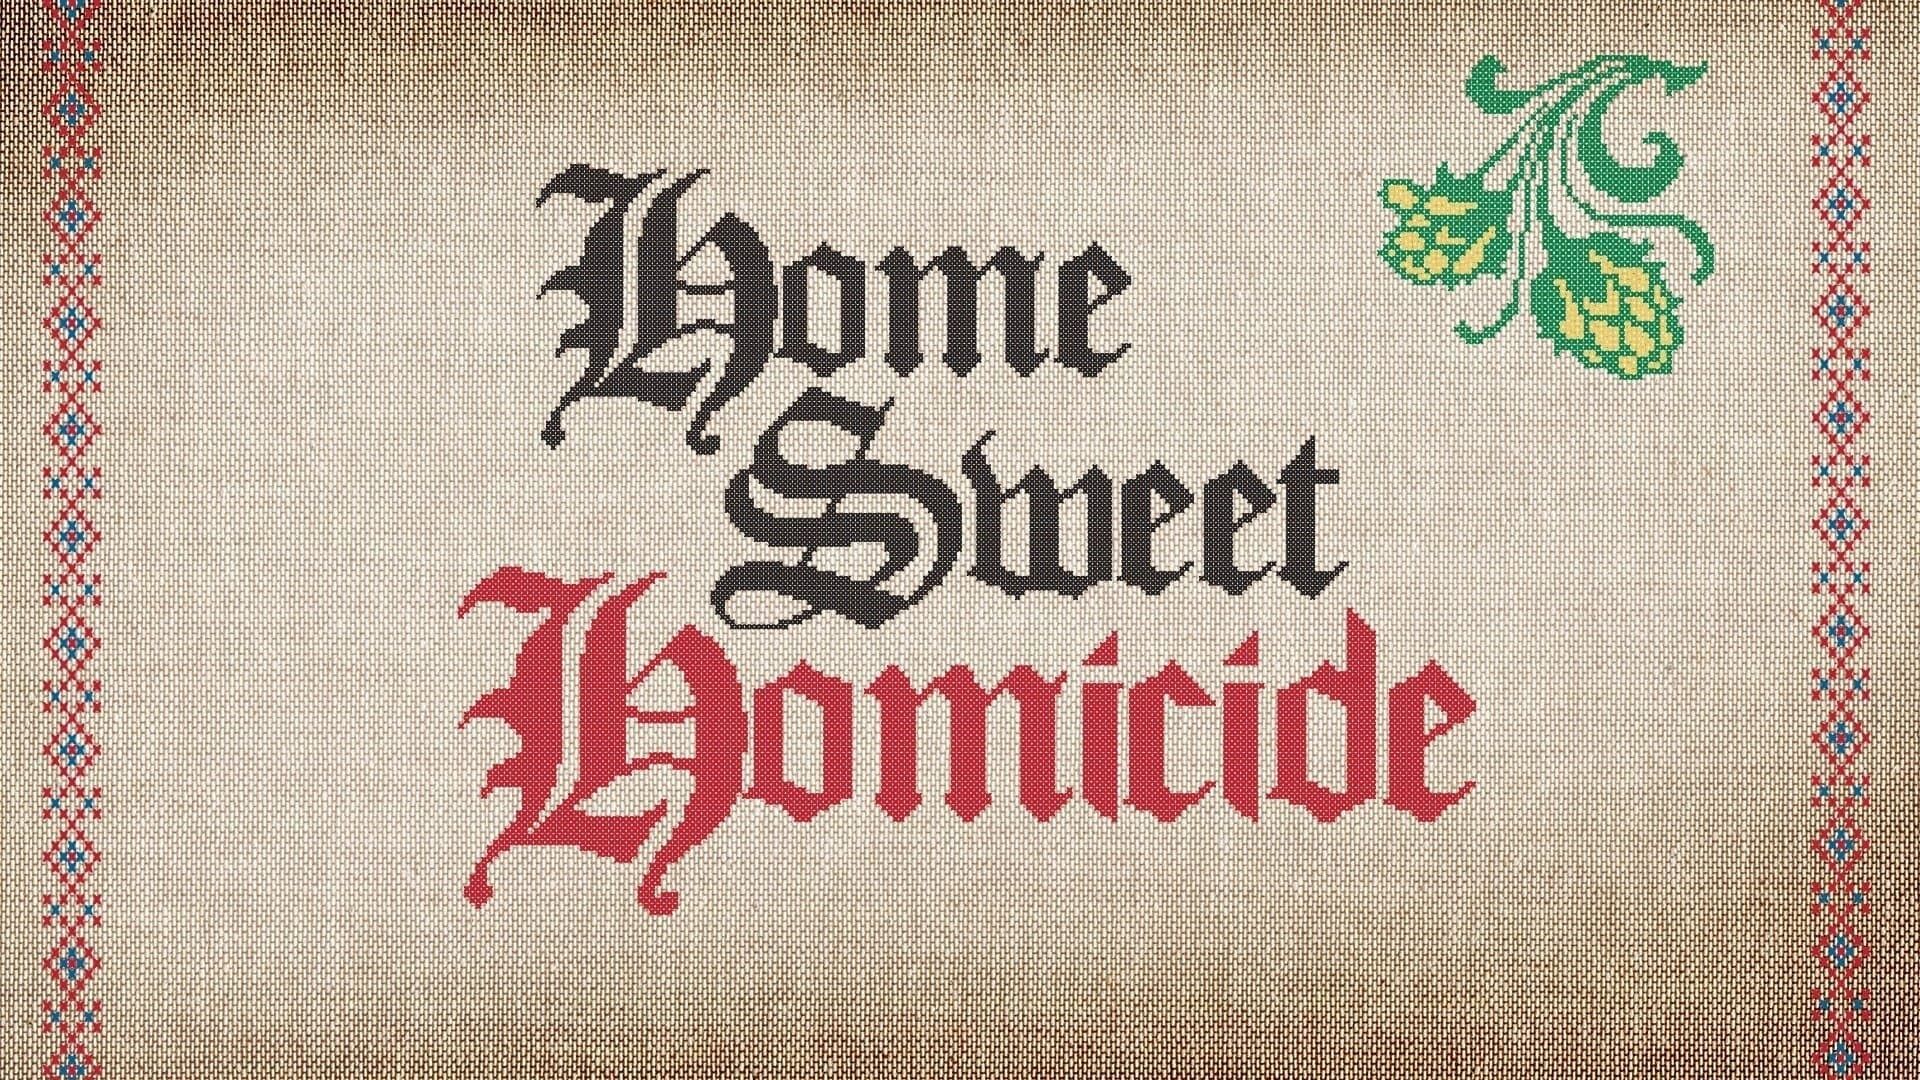 Home Sweet Homicide background